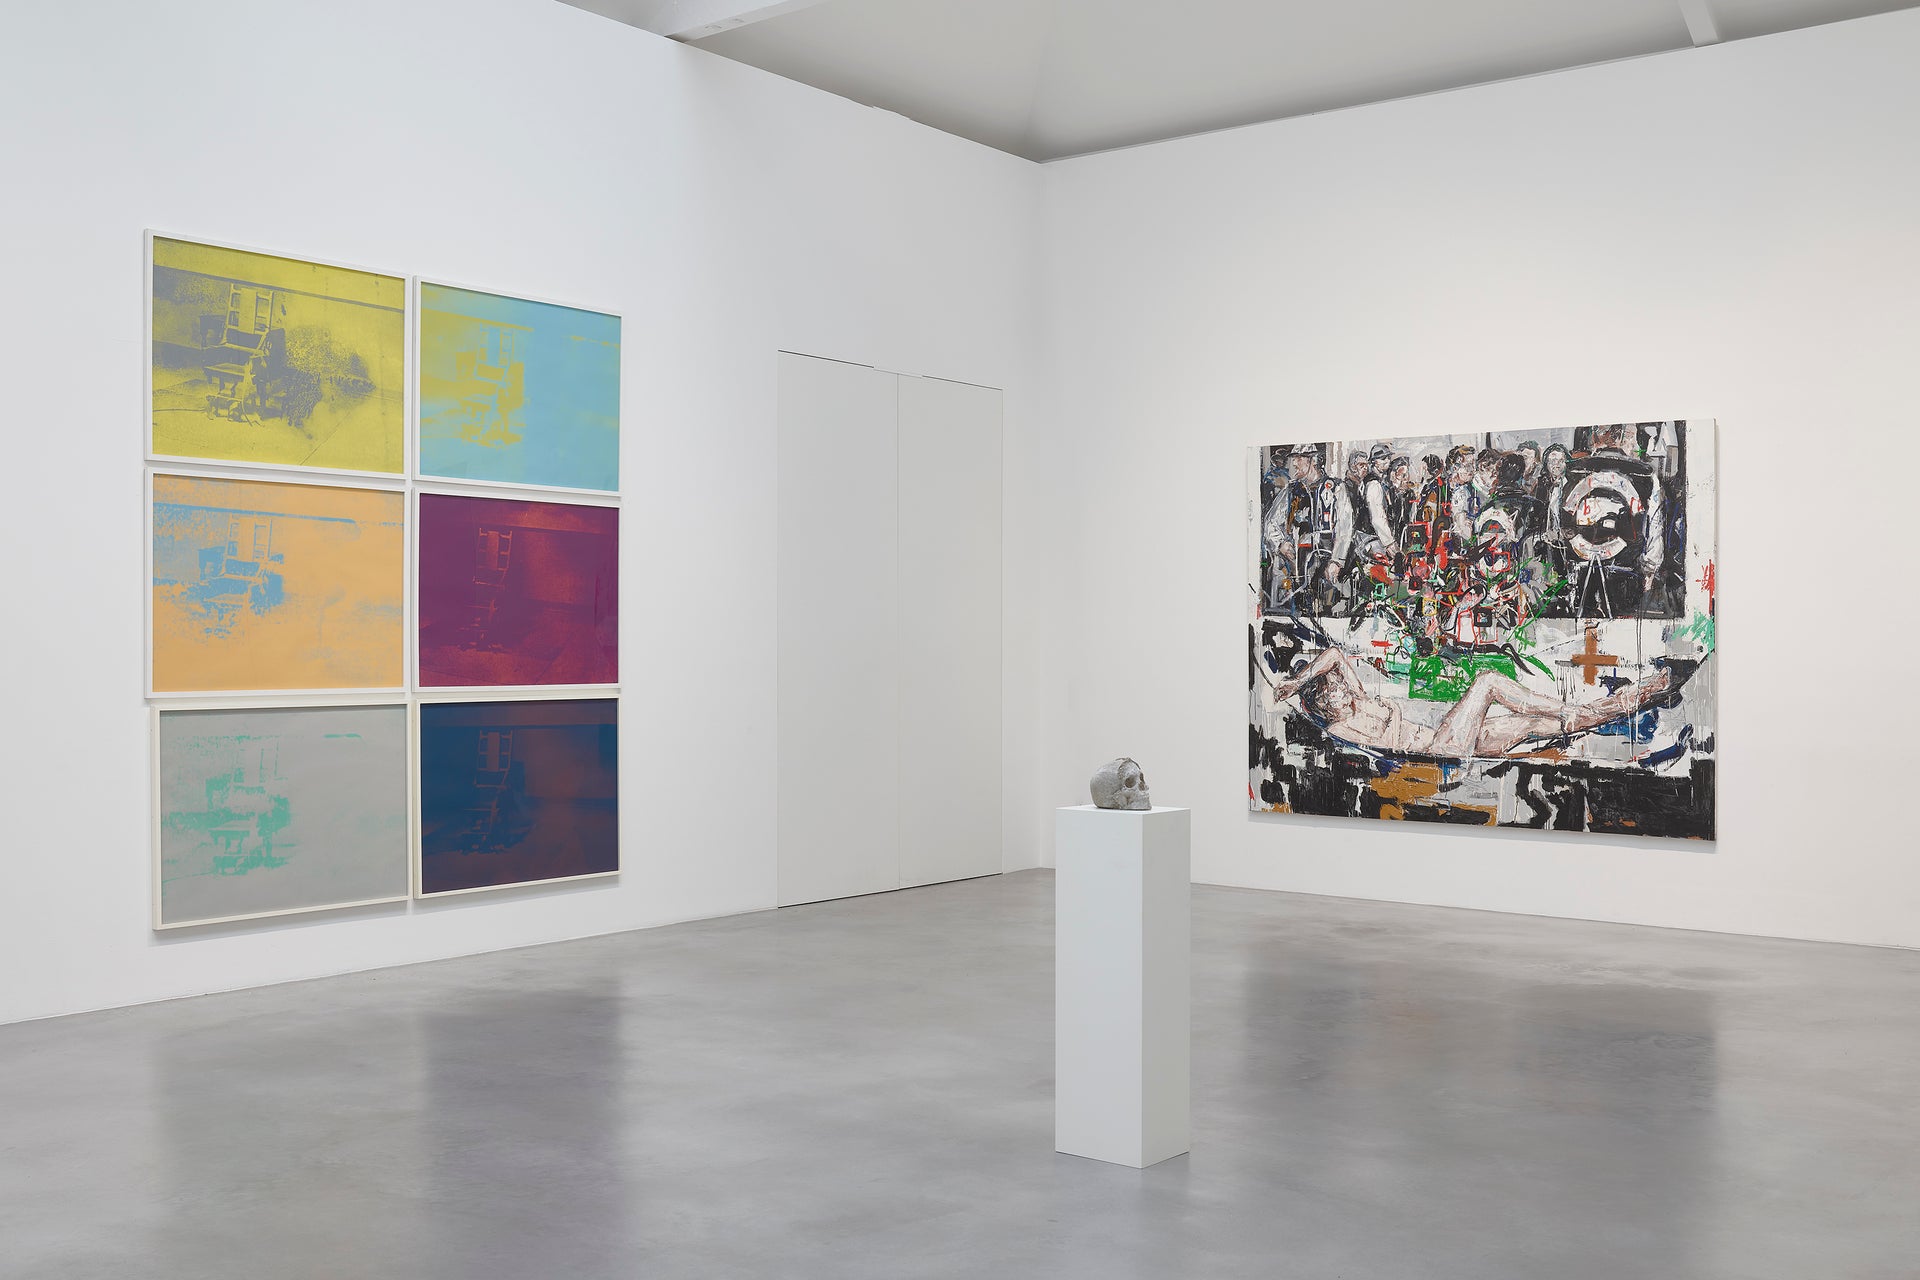 John Copeland and Wes Lang participates in a group EXHIBITION OF WORKS FROM DAMIEN HIRST’S COLLECTION alongside FRANCIS BACON, BANKSY, GEORG BASELITZ and more